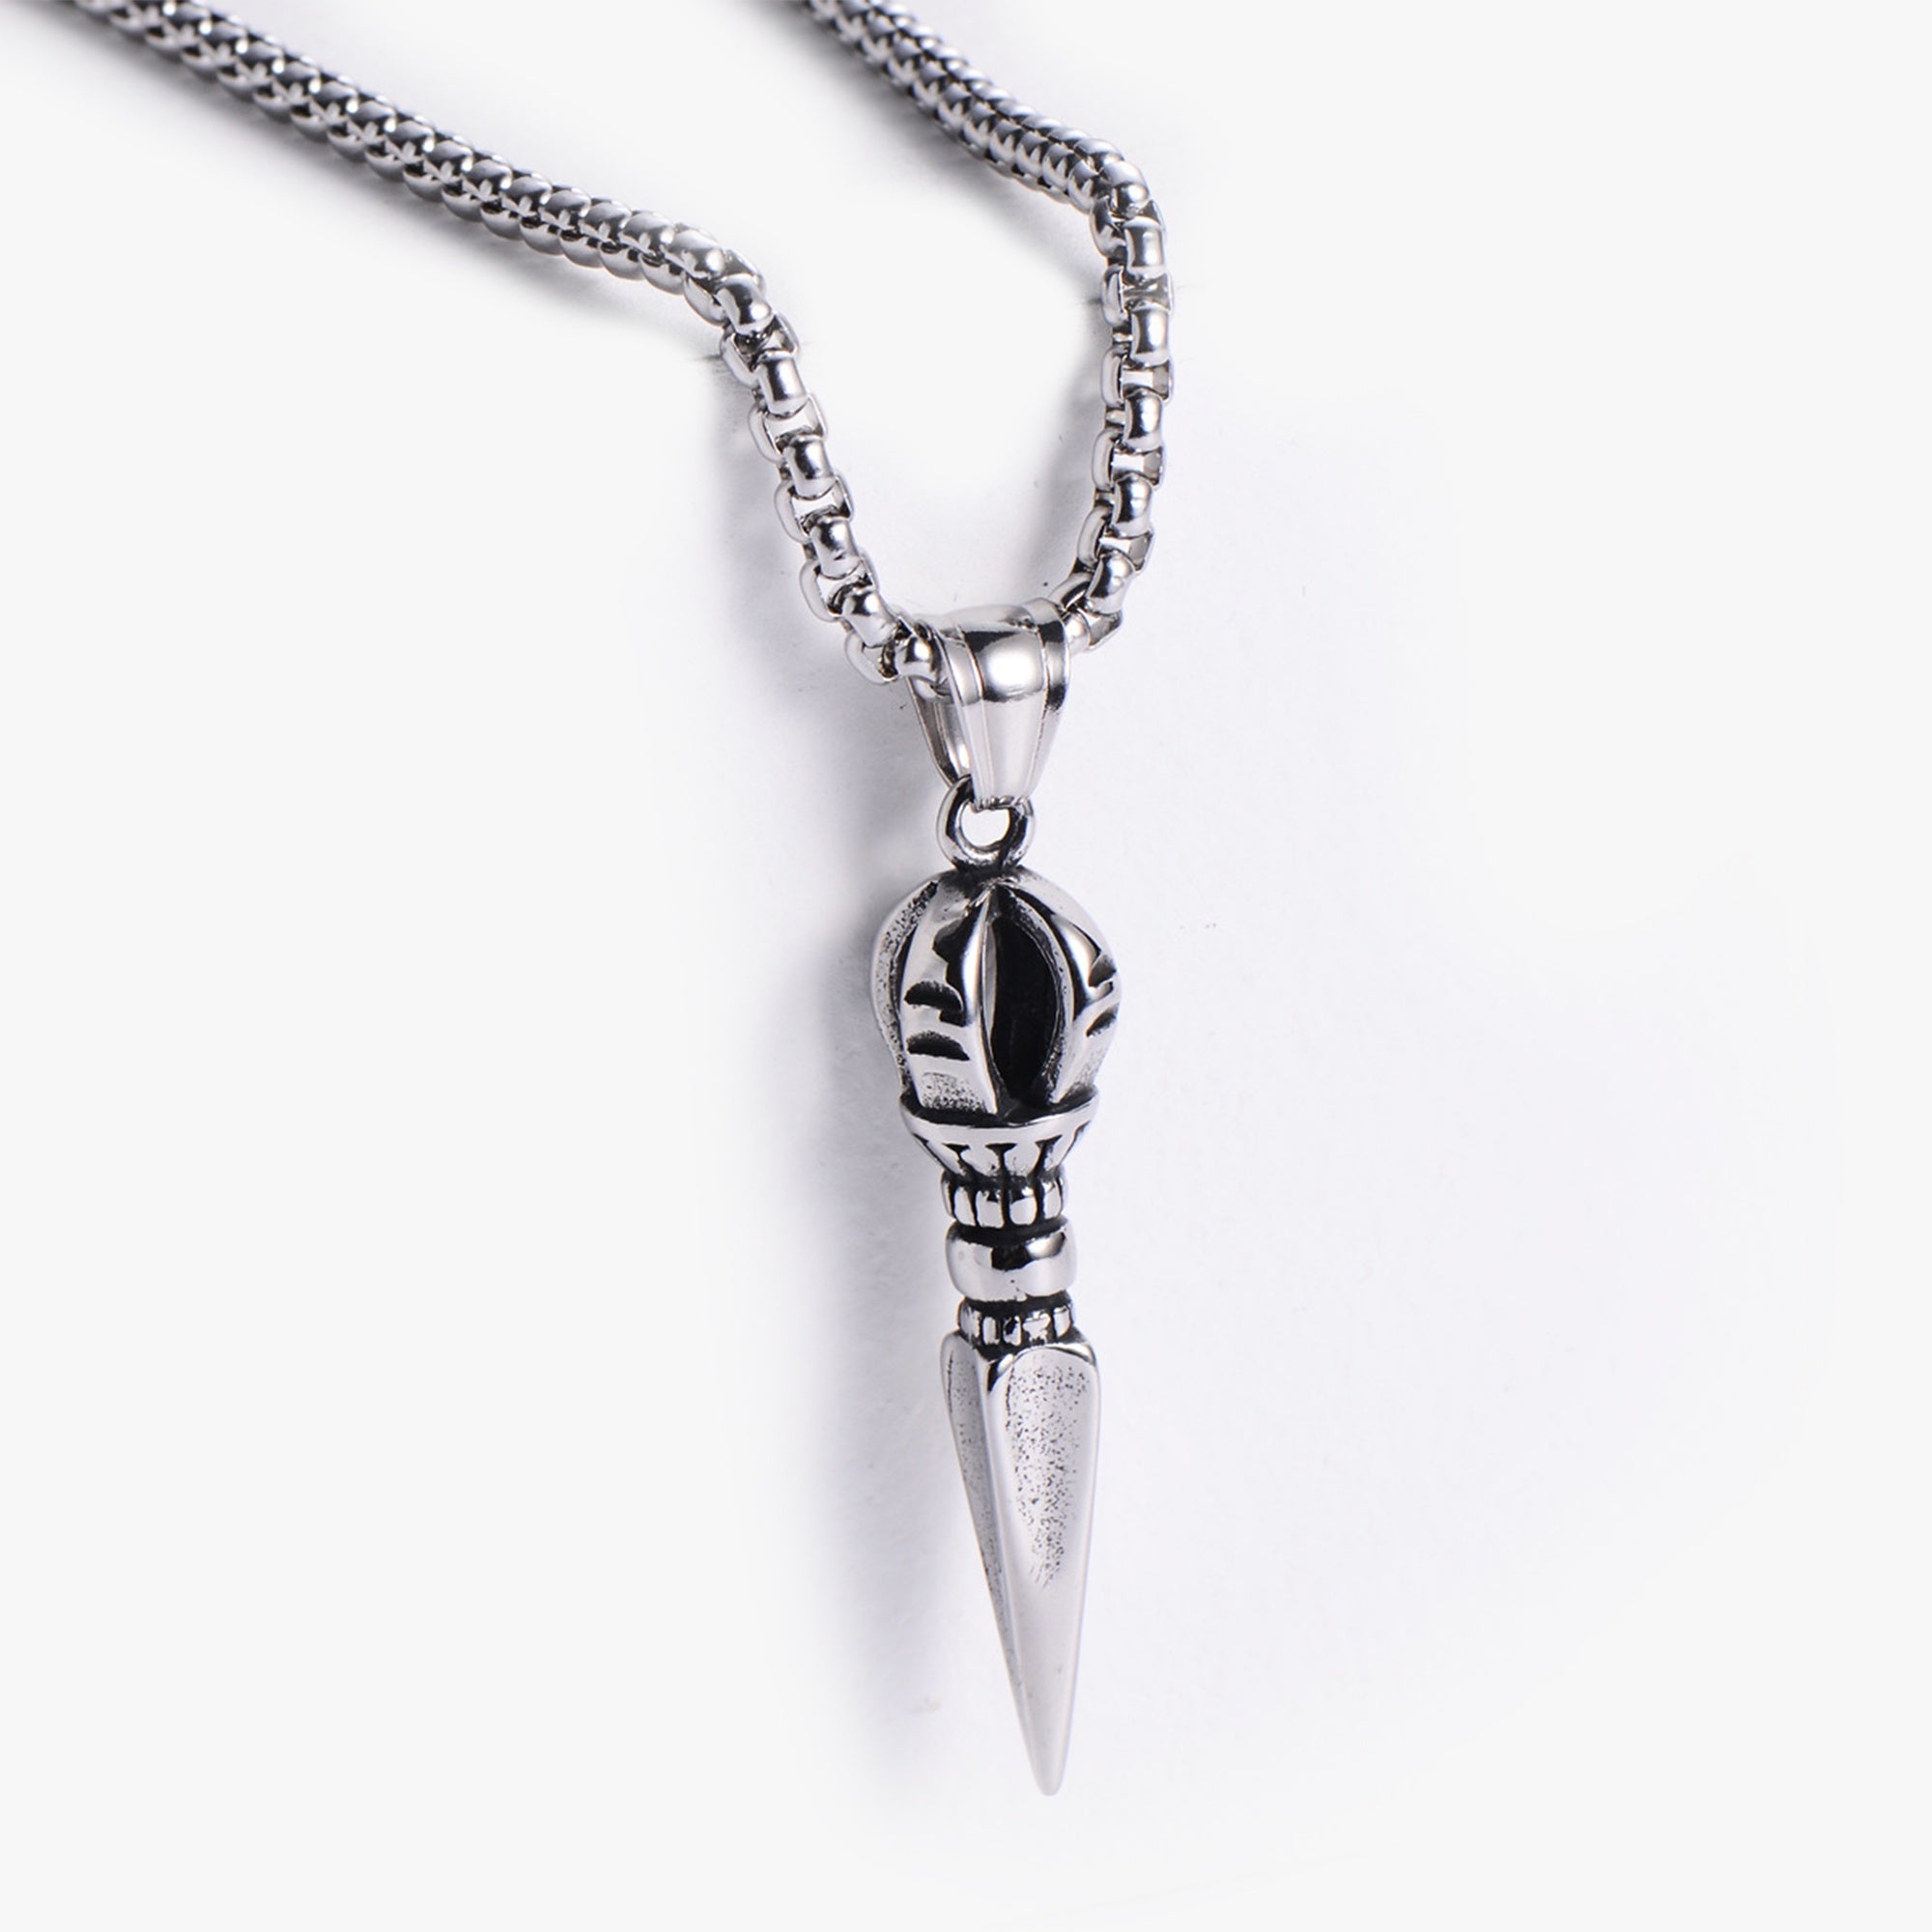 Silver Buddhist Spear Necklace